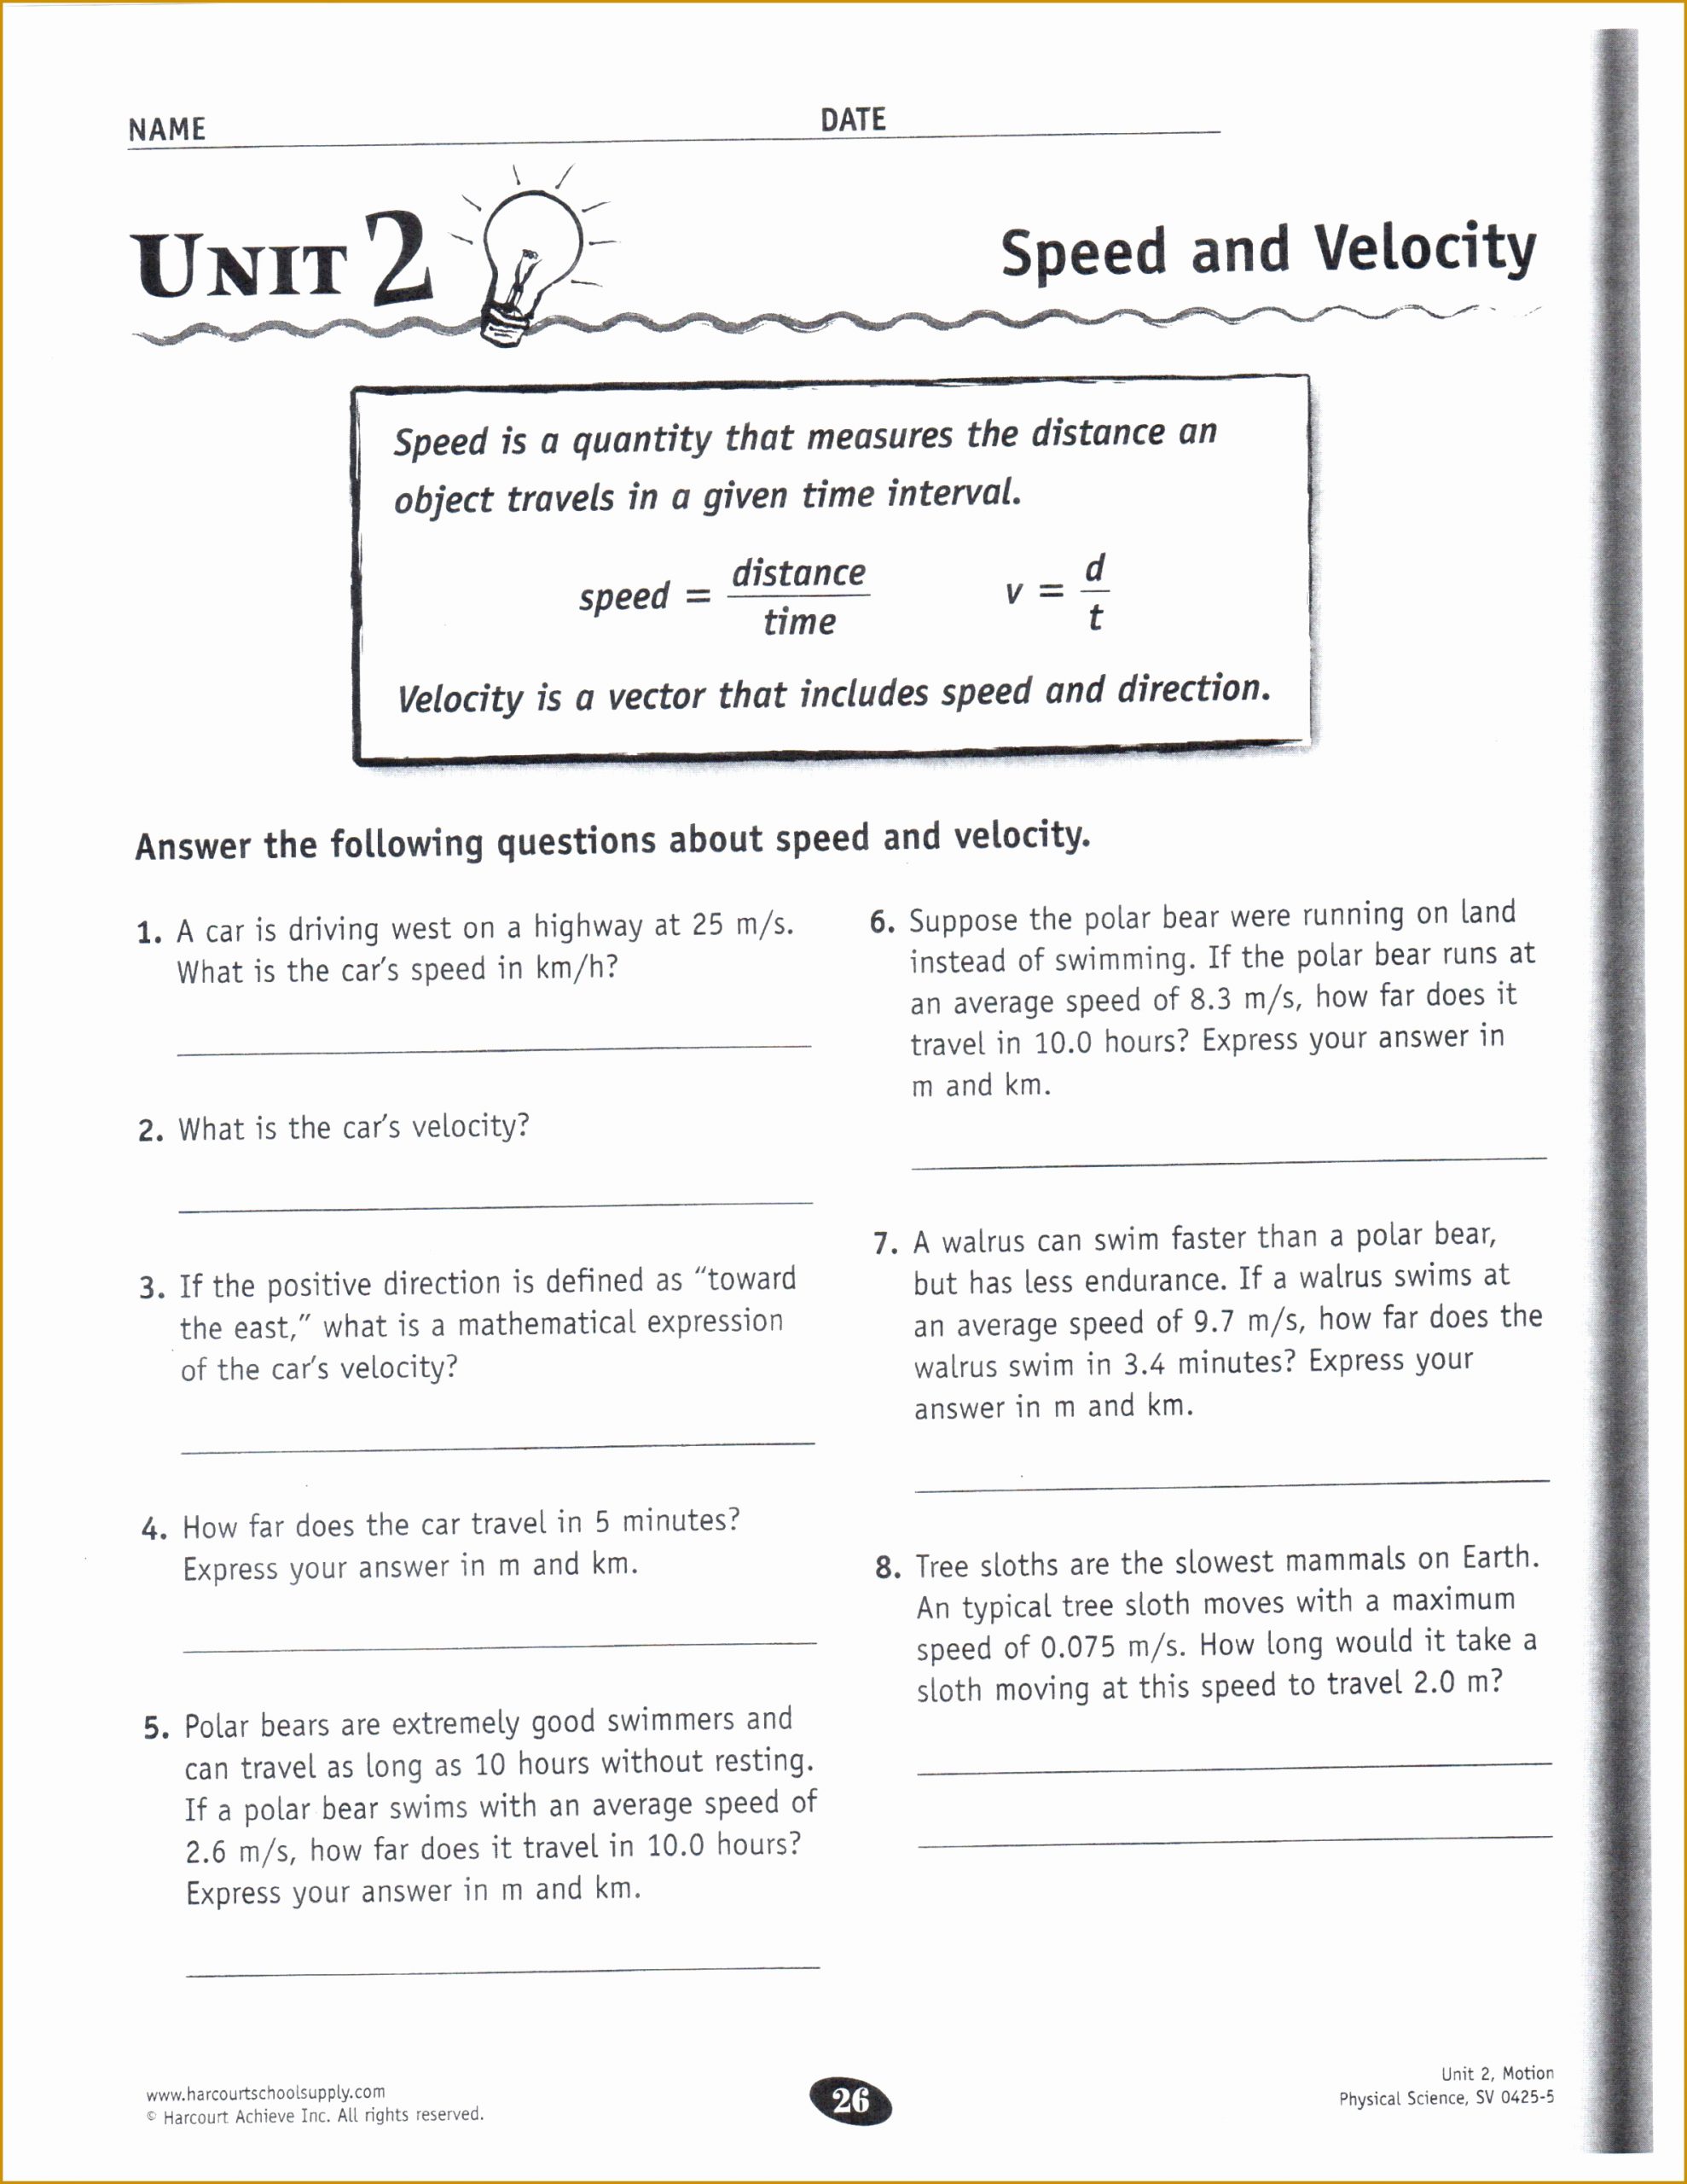 Middle School Science Worksheets Pdf Inspirational 6 Velocity and Acceleration Calculation Worksheet Answers